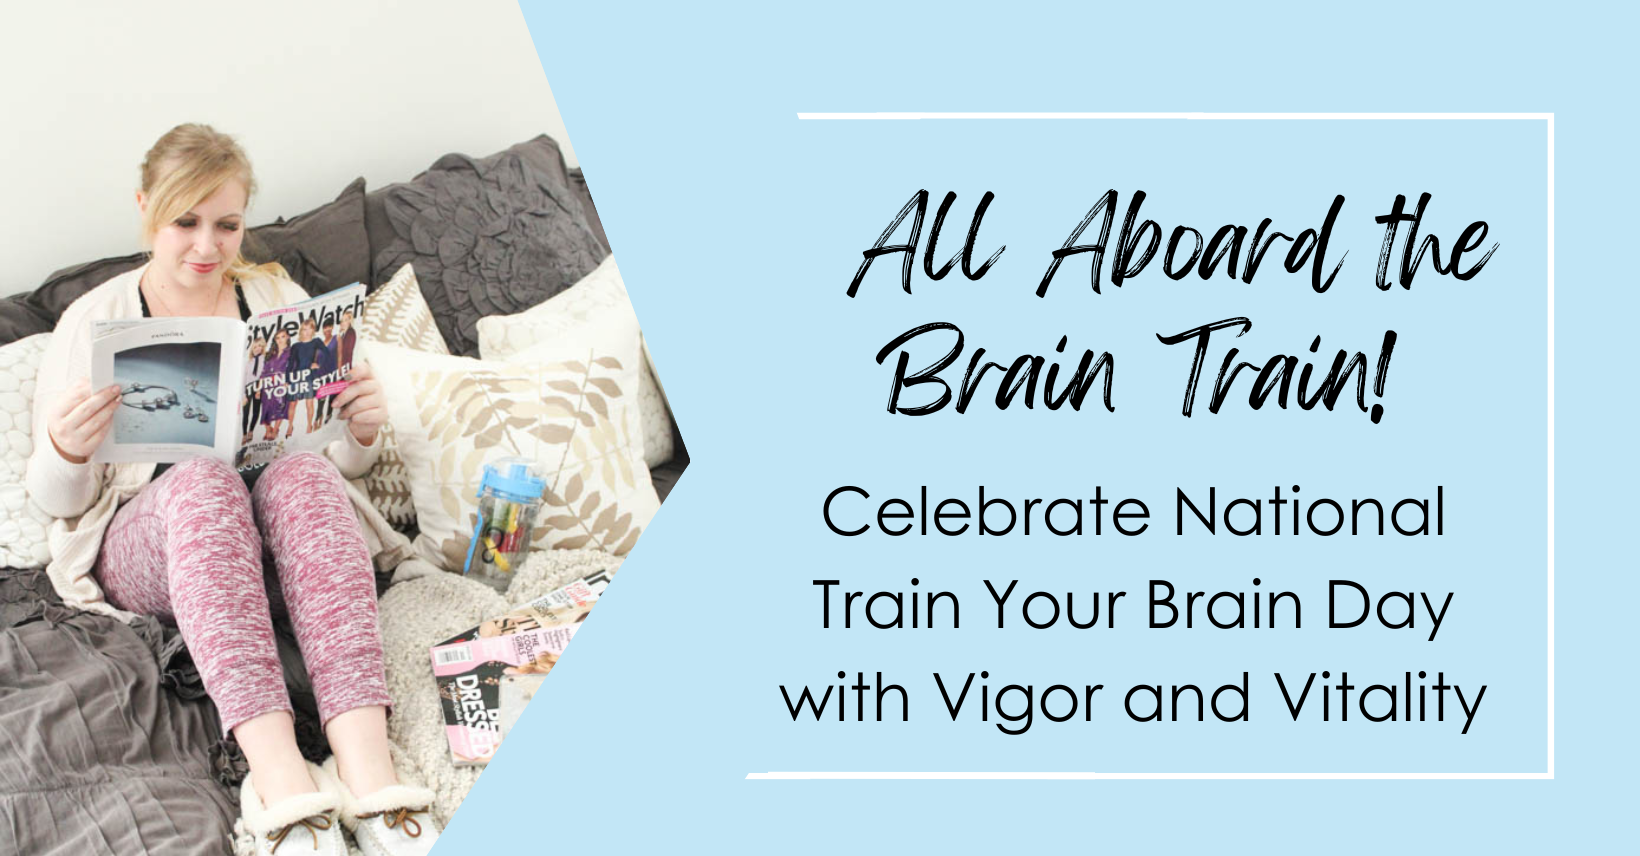 All Aboard the Brain Train! Celebrate National Train Your Brain Day with Vigor and Vitality